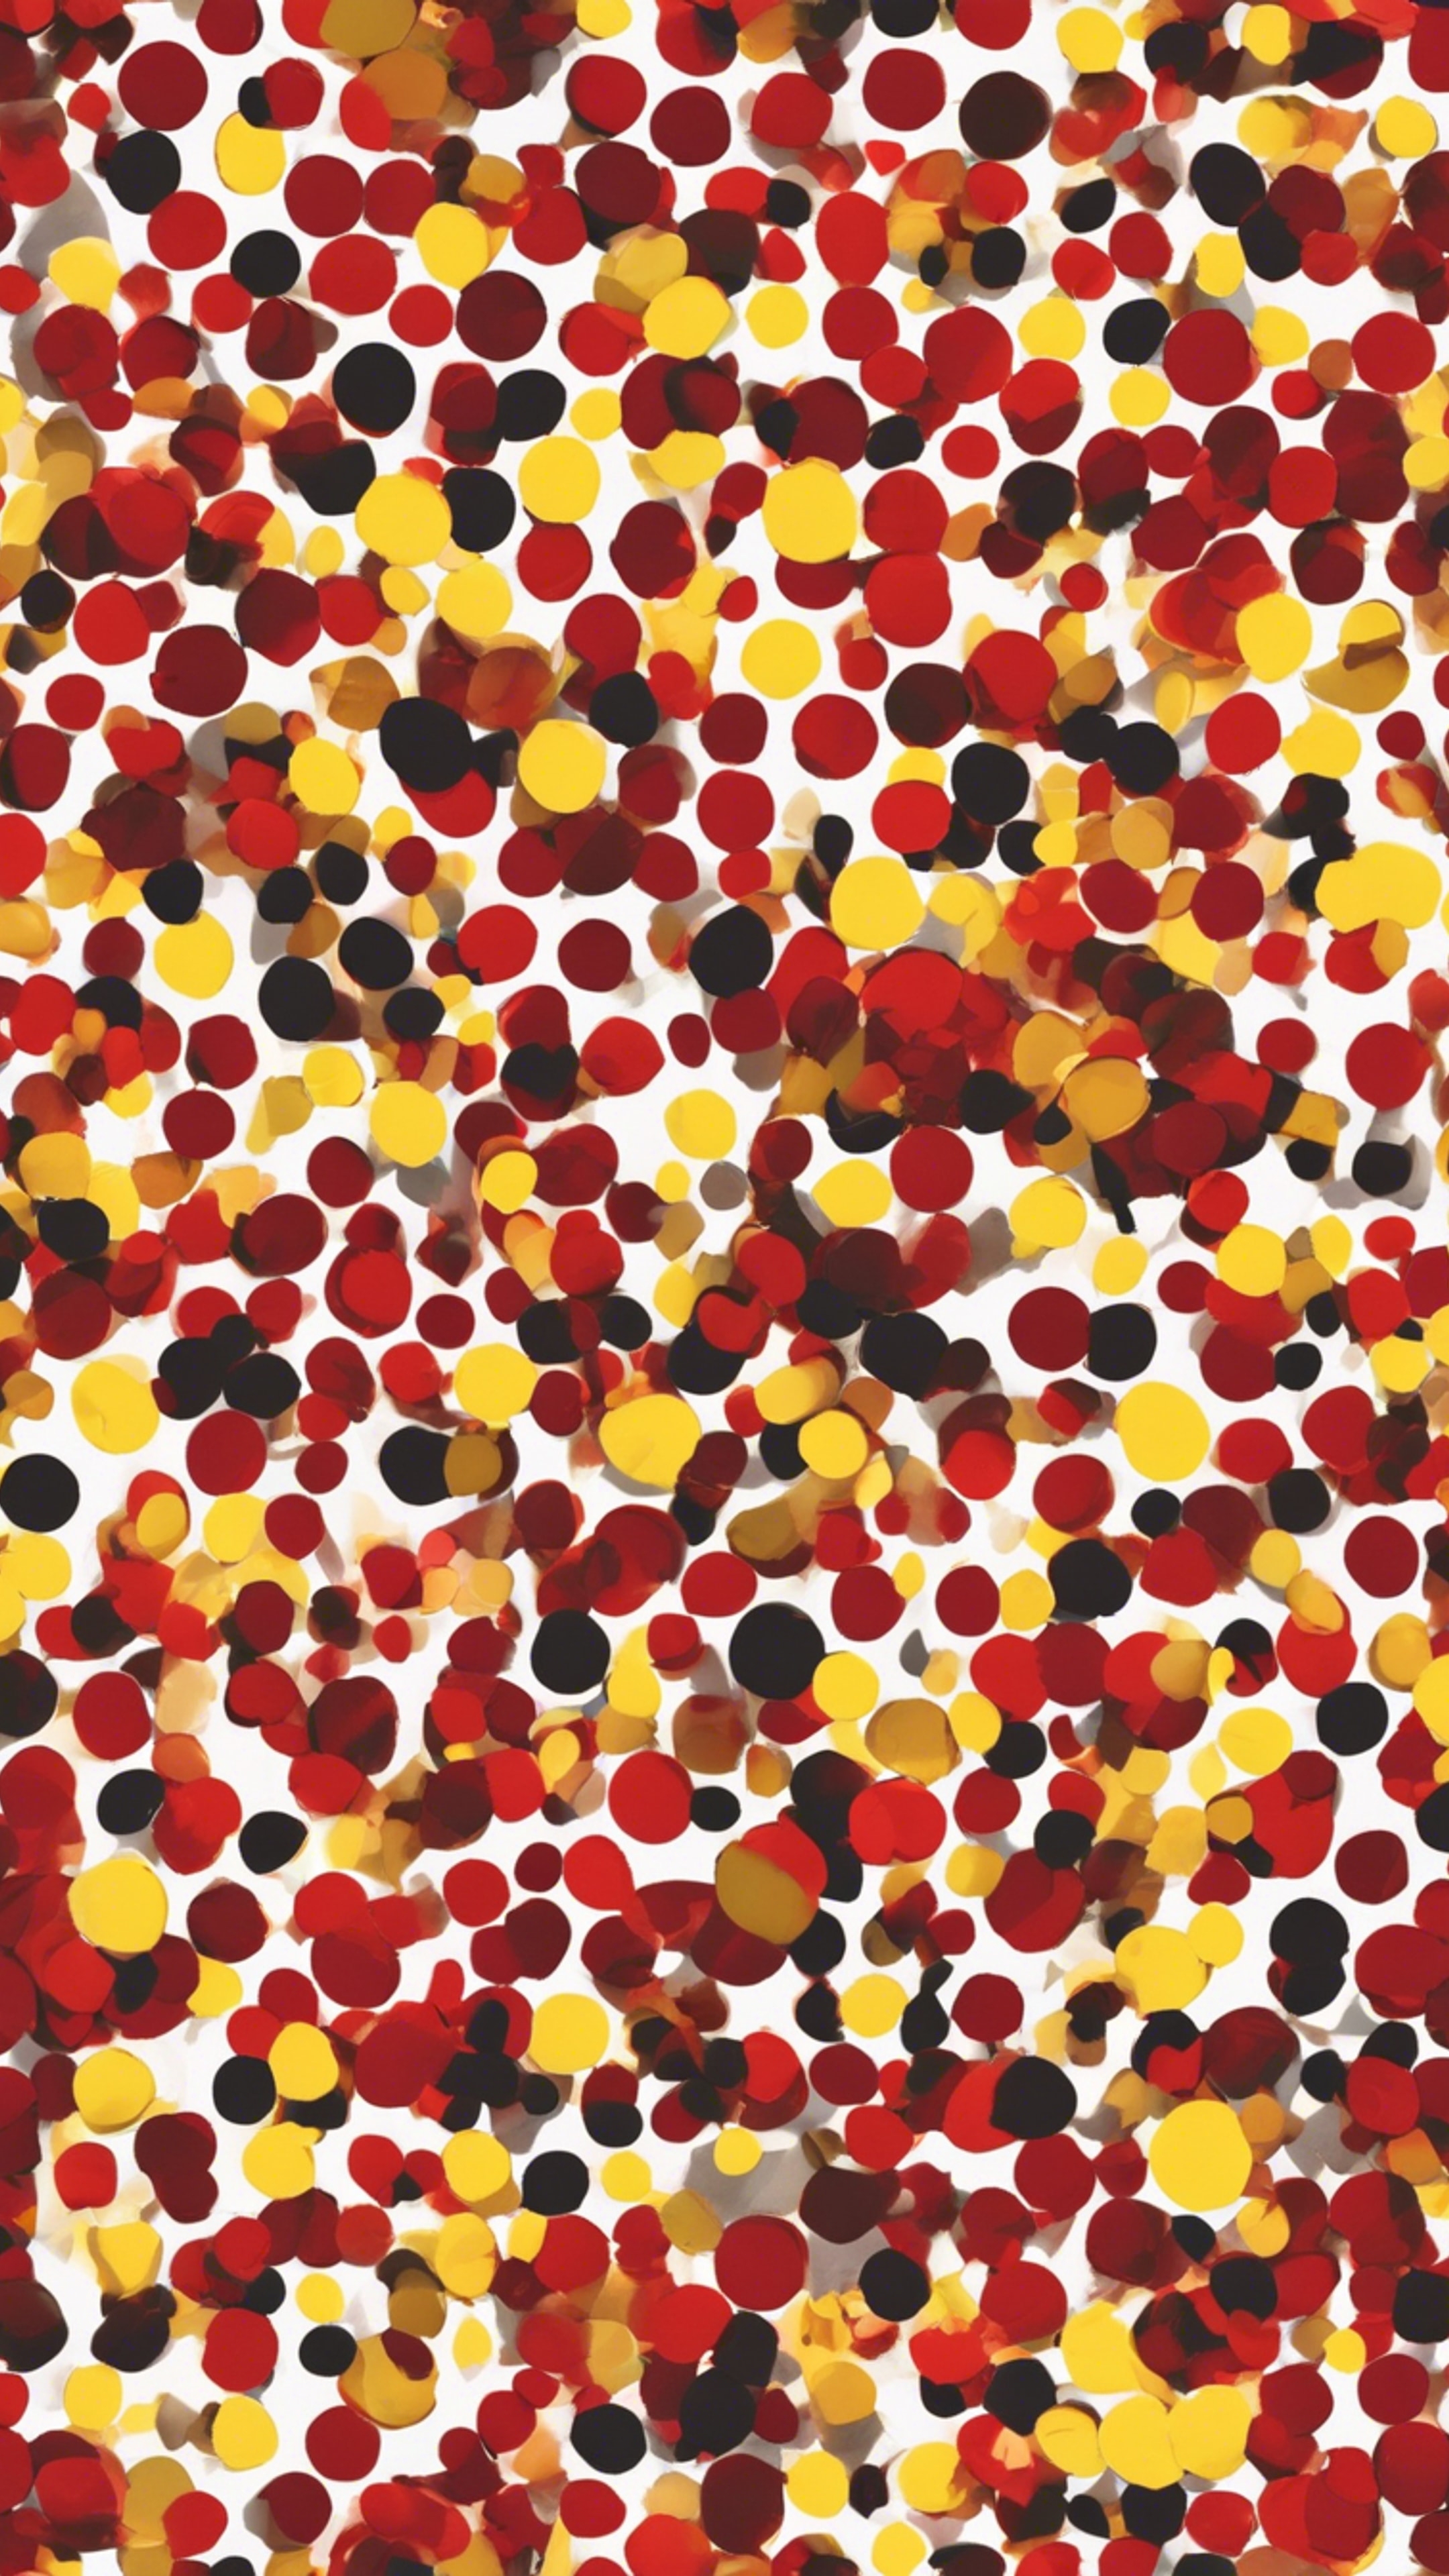 Scattered polka dots, small red ones and large yellow ones, in a seamless pattern. 牆紙[491989b84cbb438494fe]